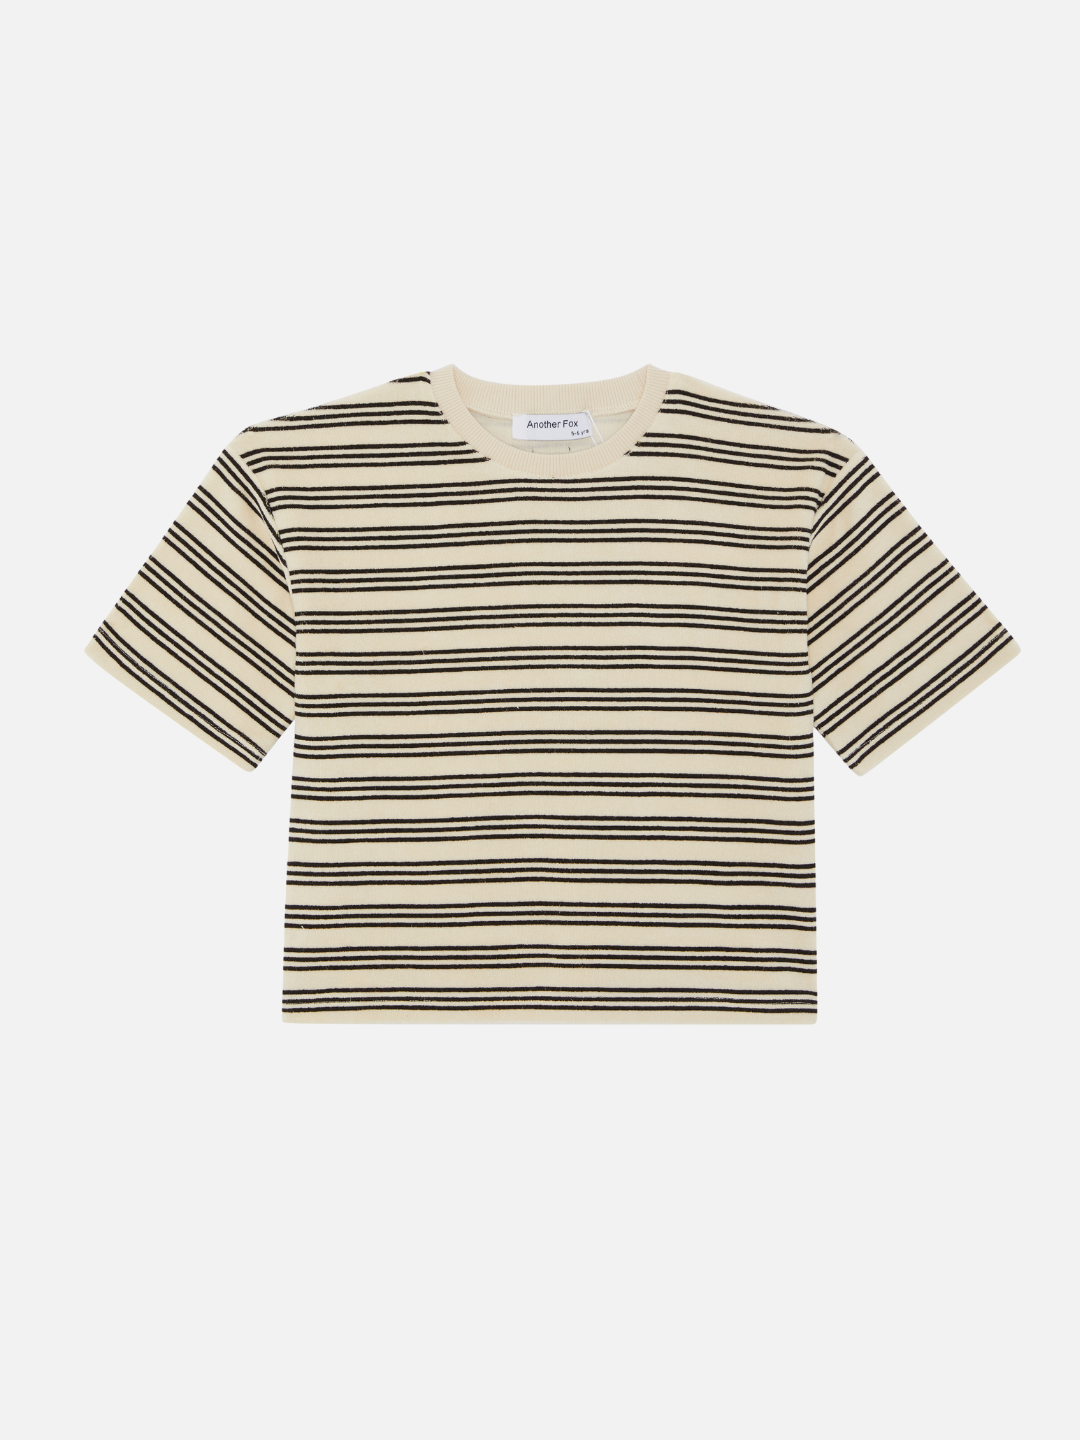 Stripe | A front view of the kid's tee in stripe print